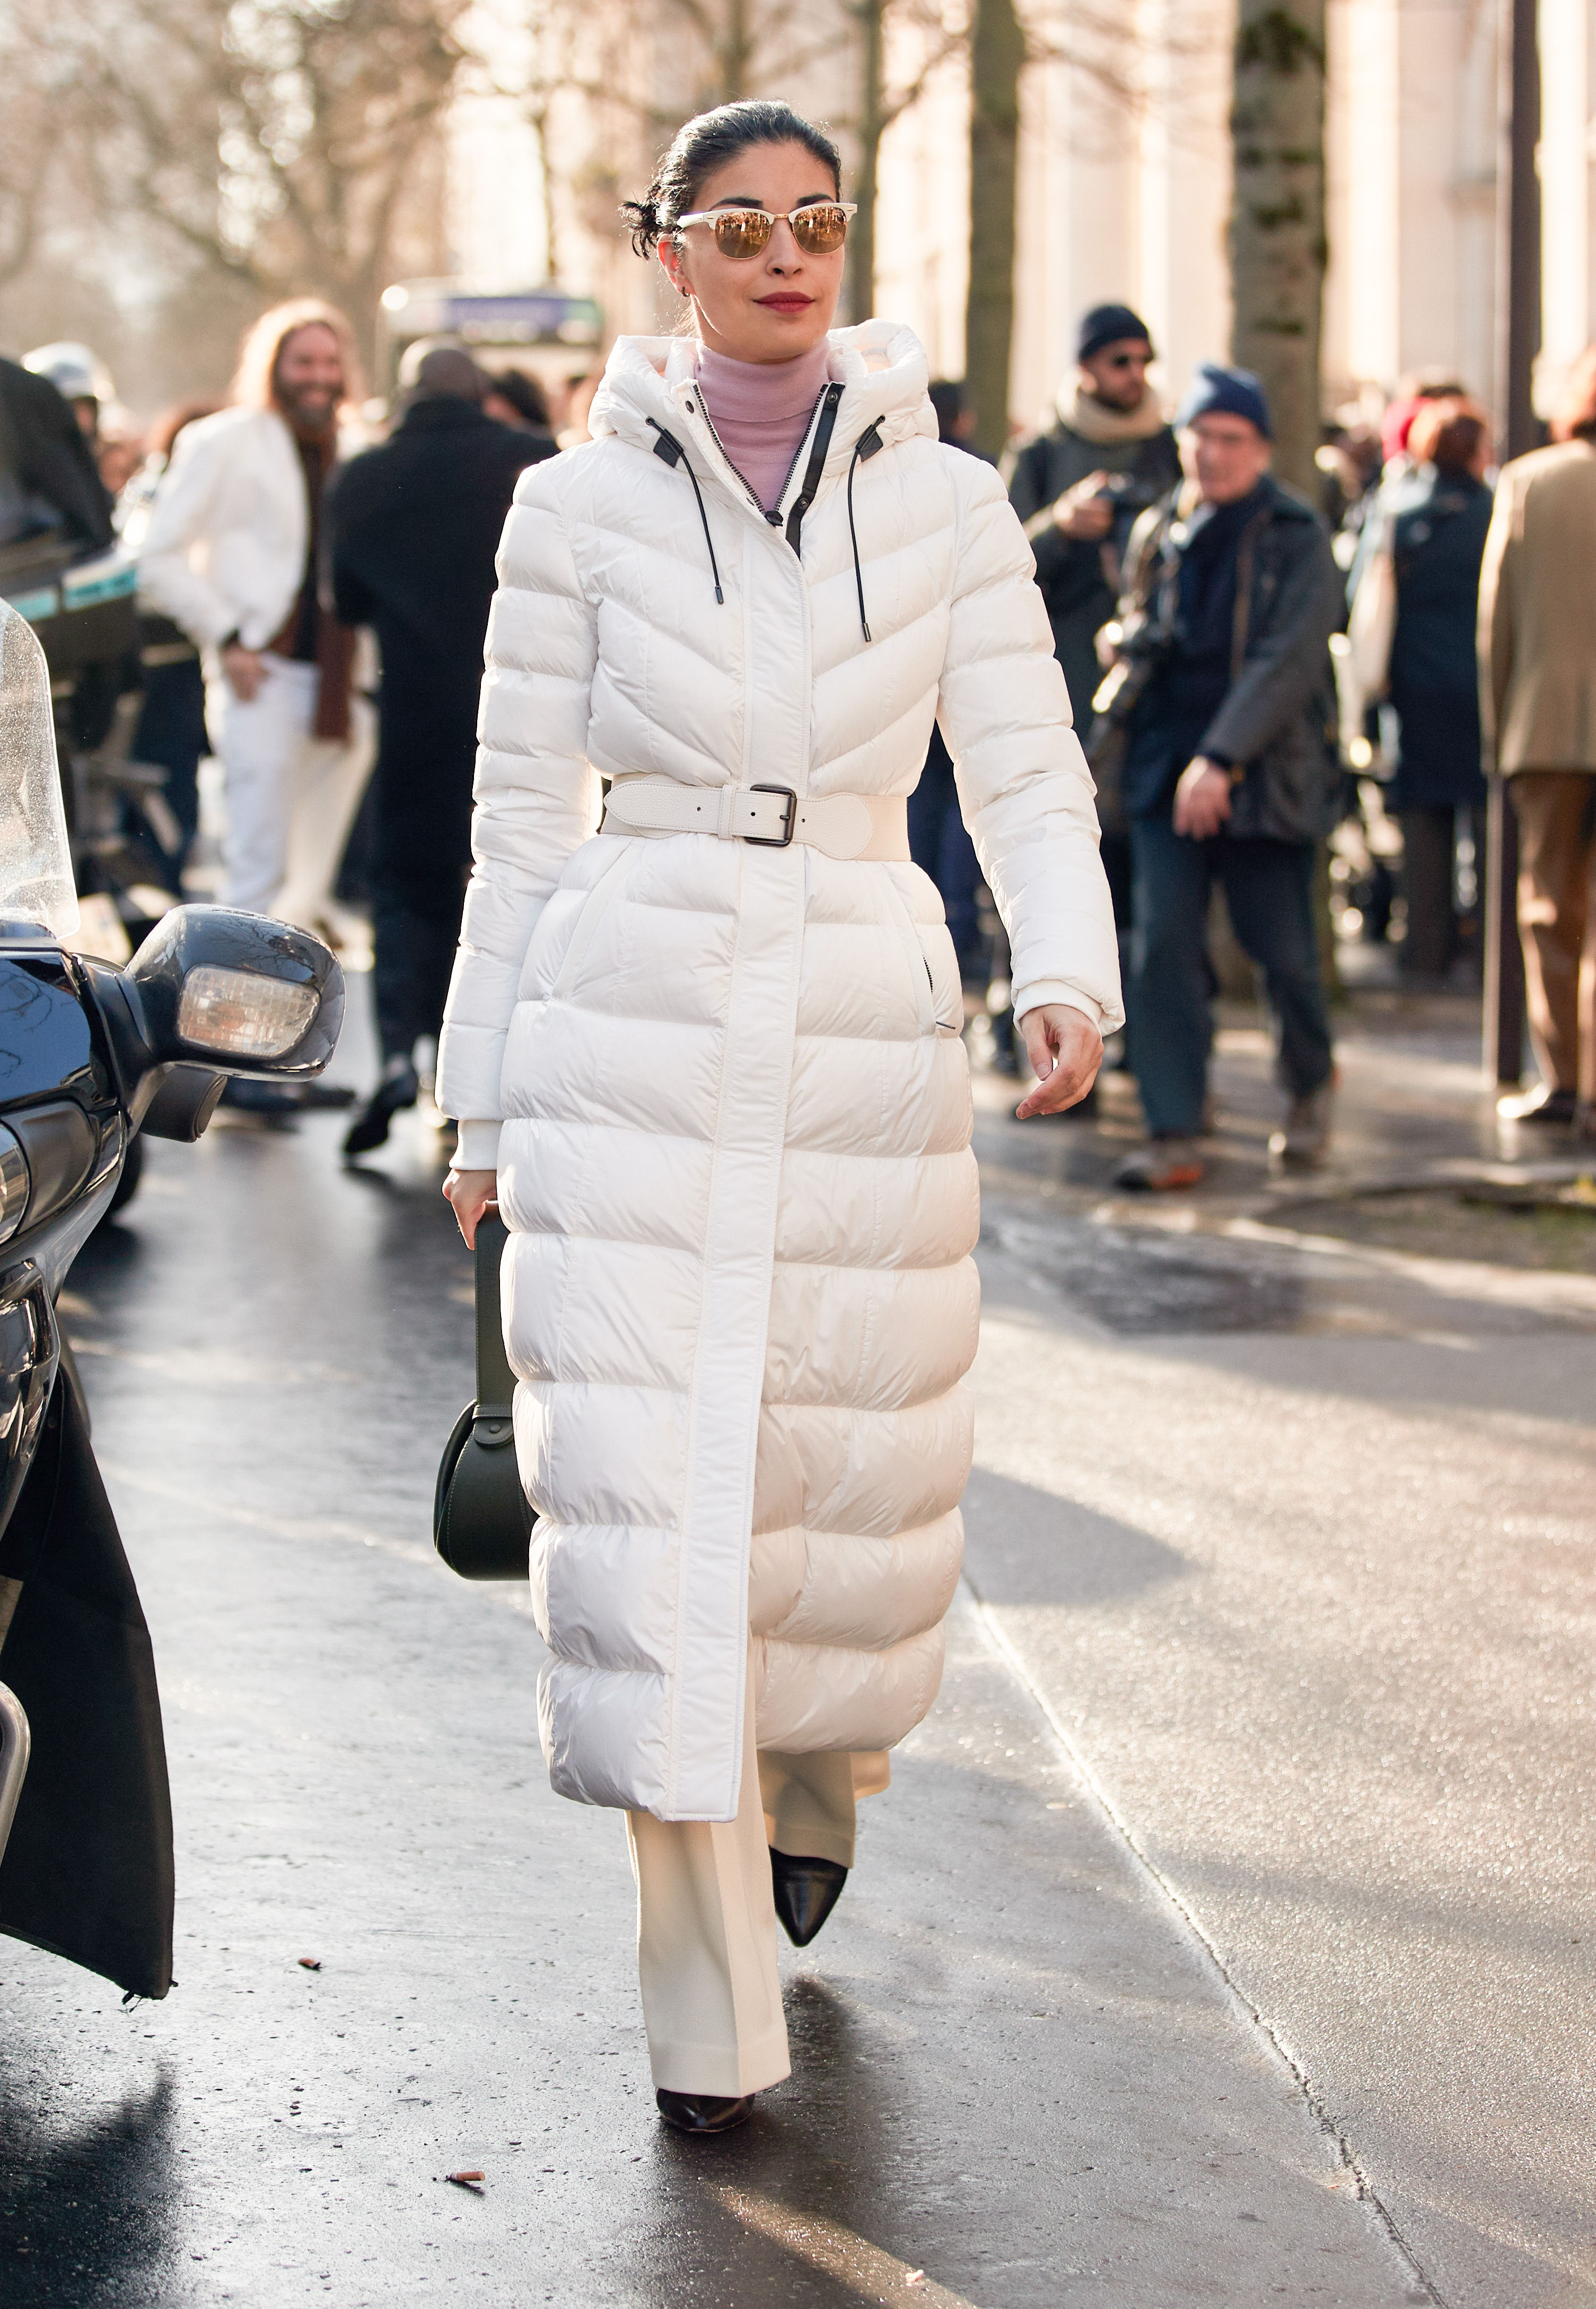 What To Wear In 30 Degree Weather, When To Wear A Coat Temperature